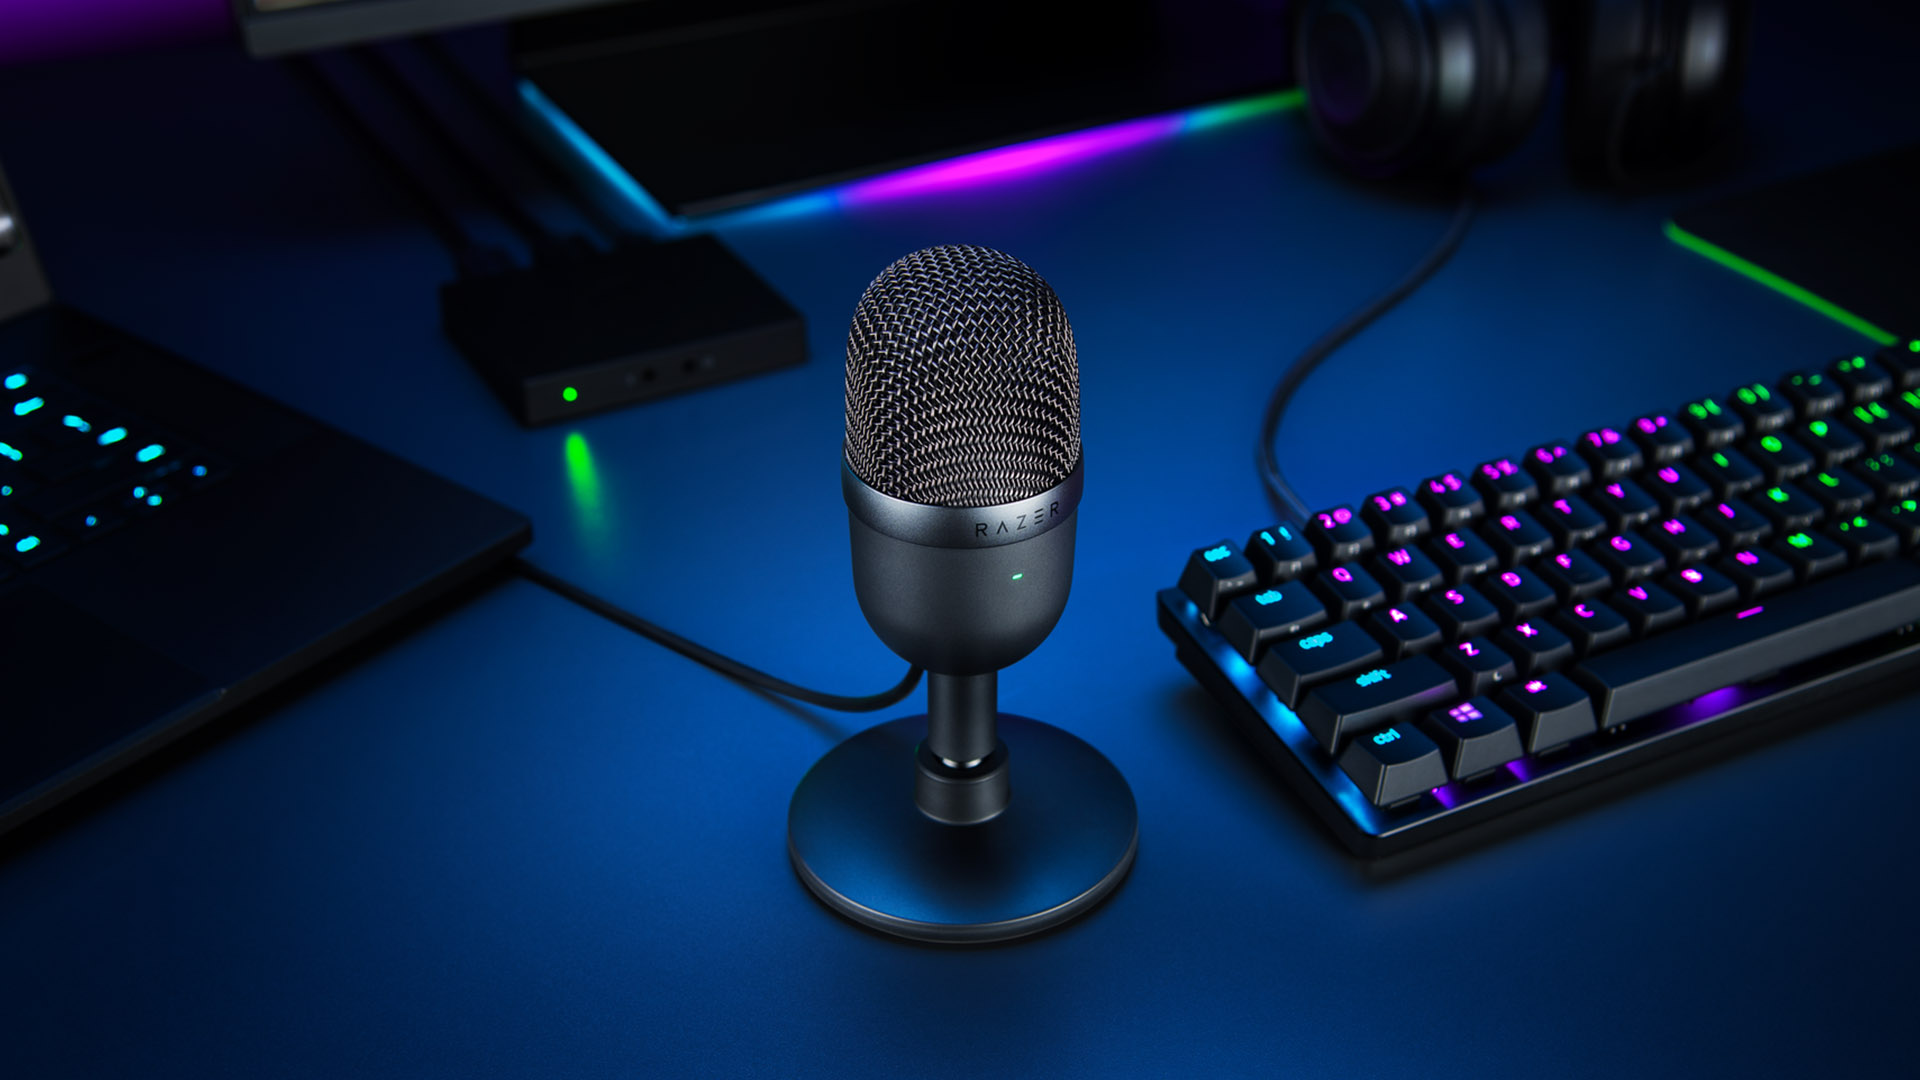  Microphone For Gaming